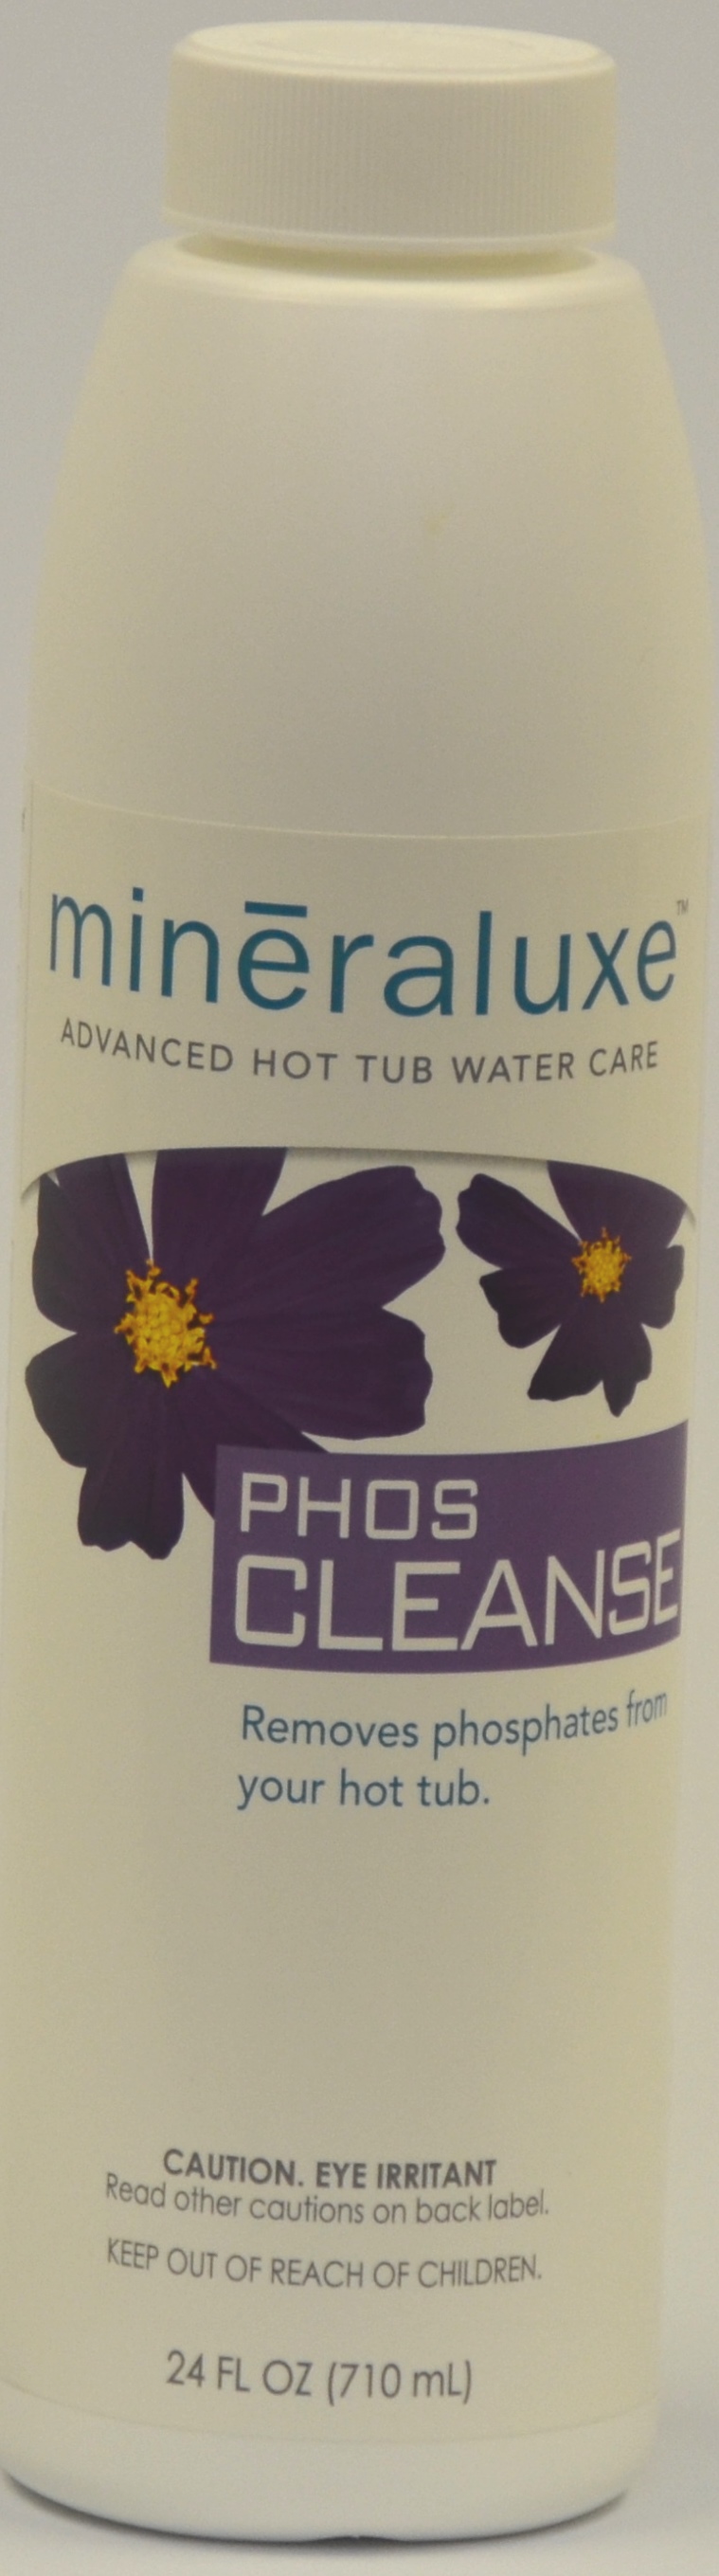 Mineraluxe Phos Cleanse 16 X 24 oz - SPA CHEMICALS